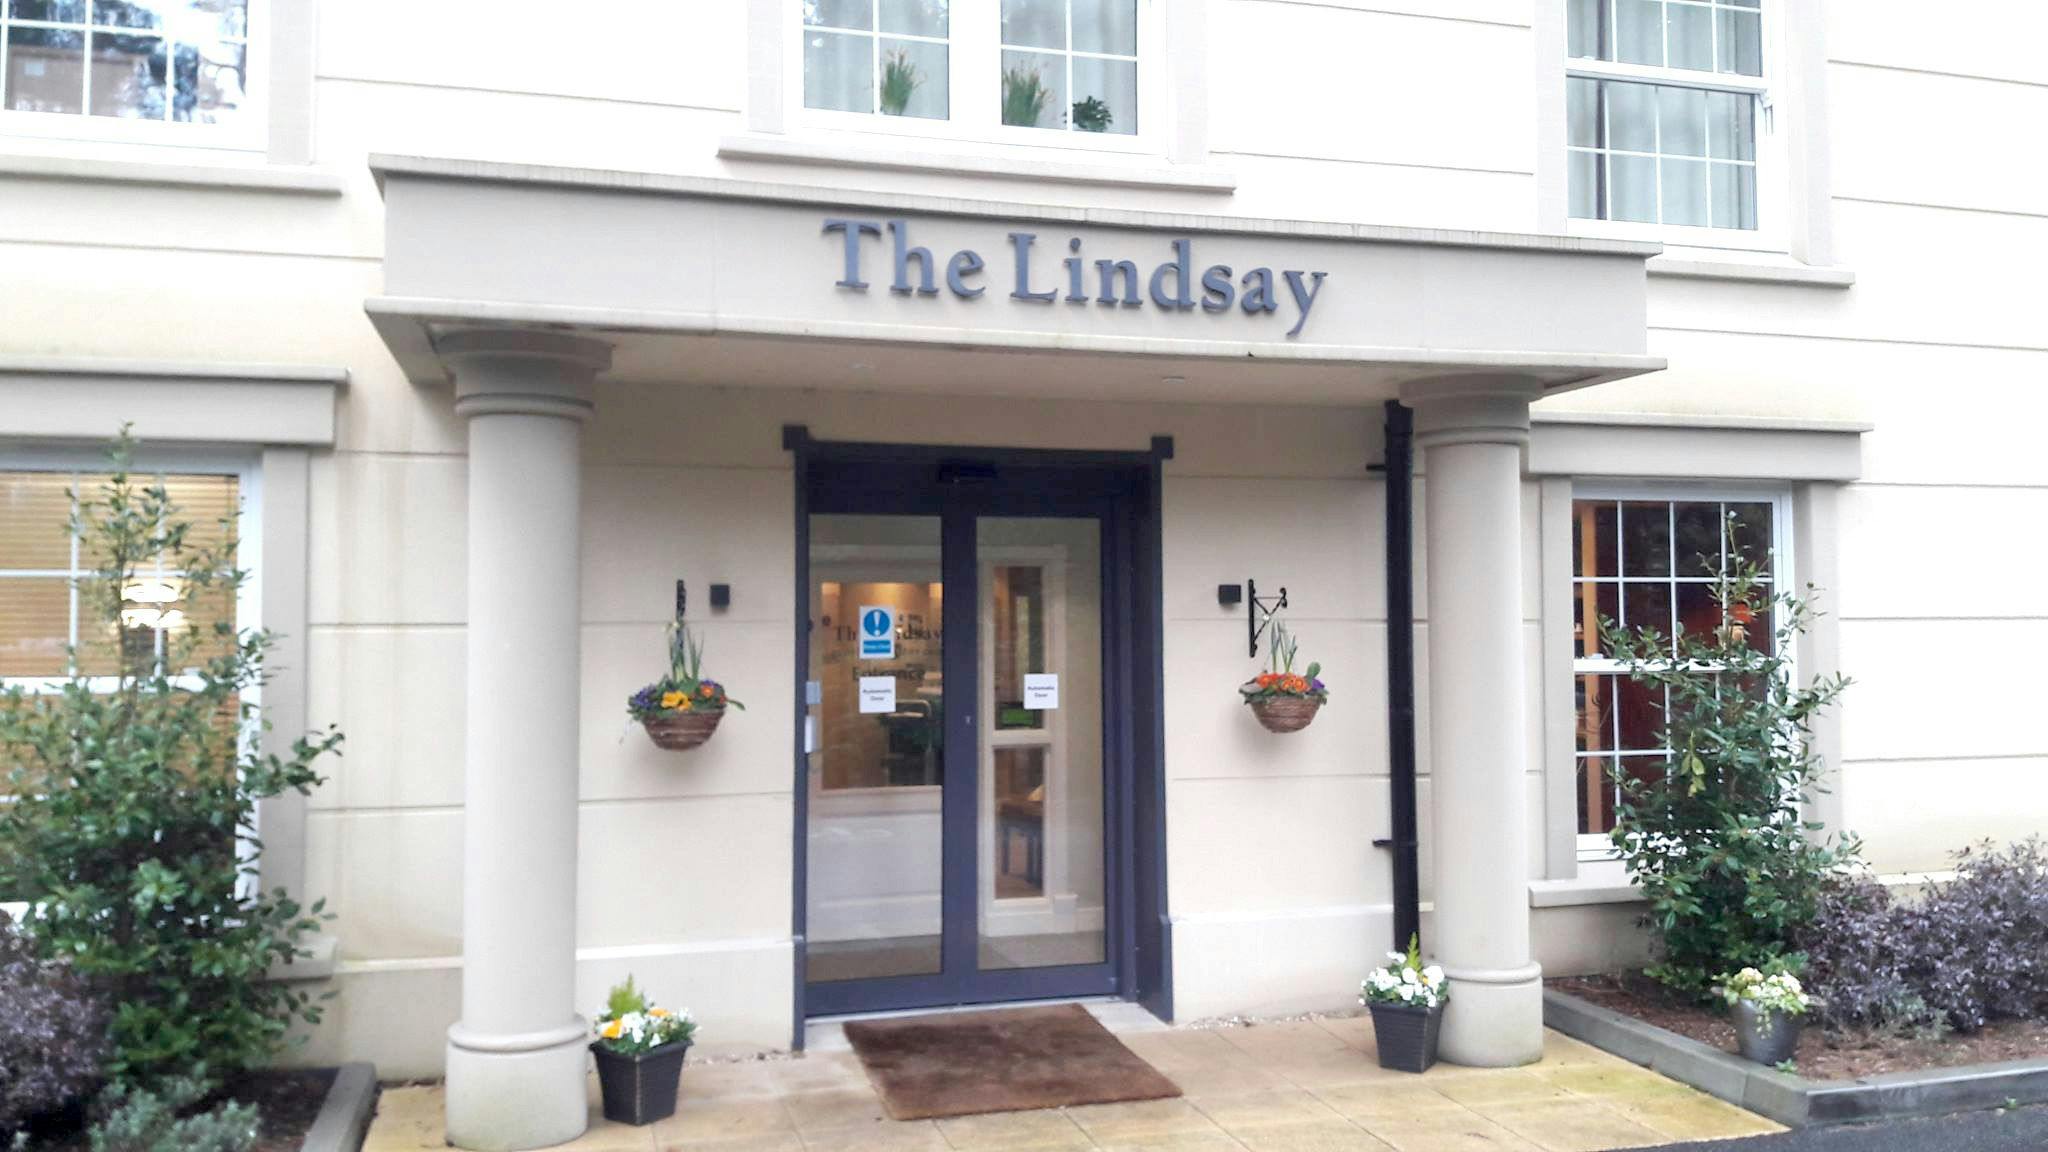 The Lindsay care home